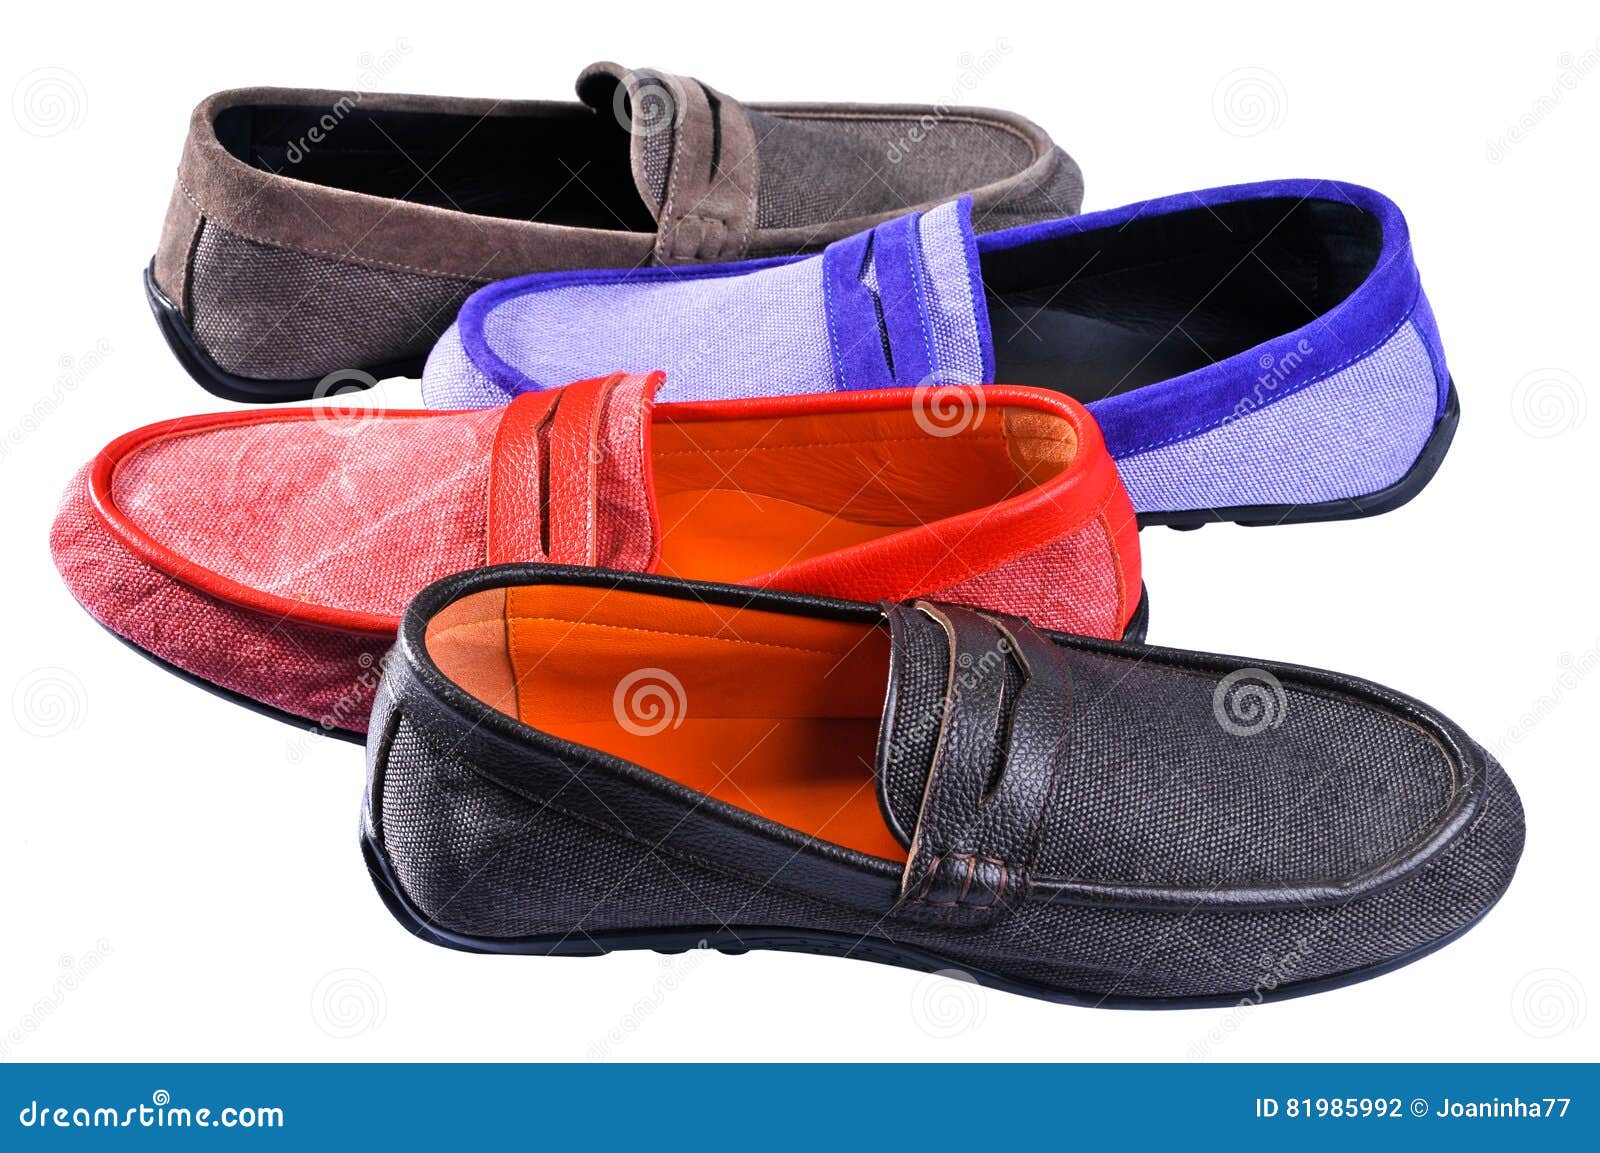 multi colored shoes mens